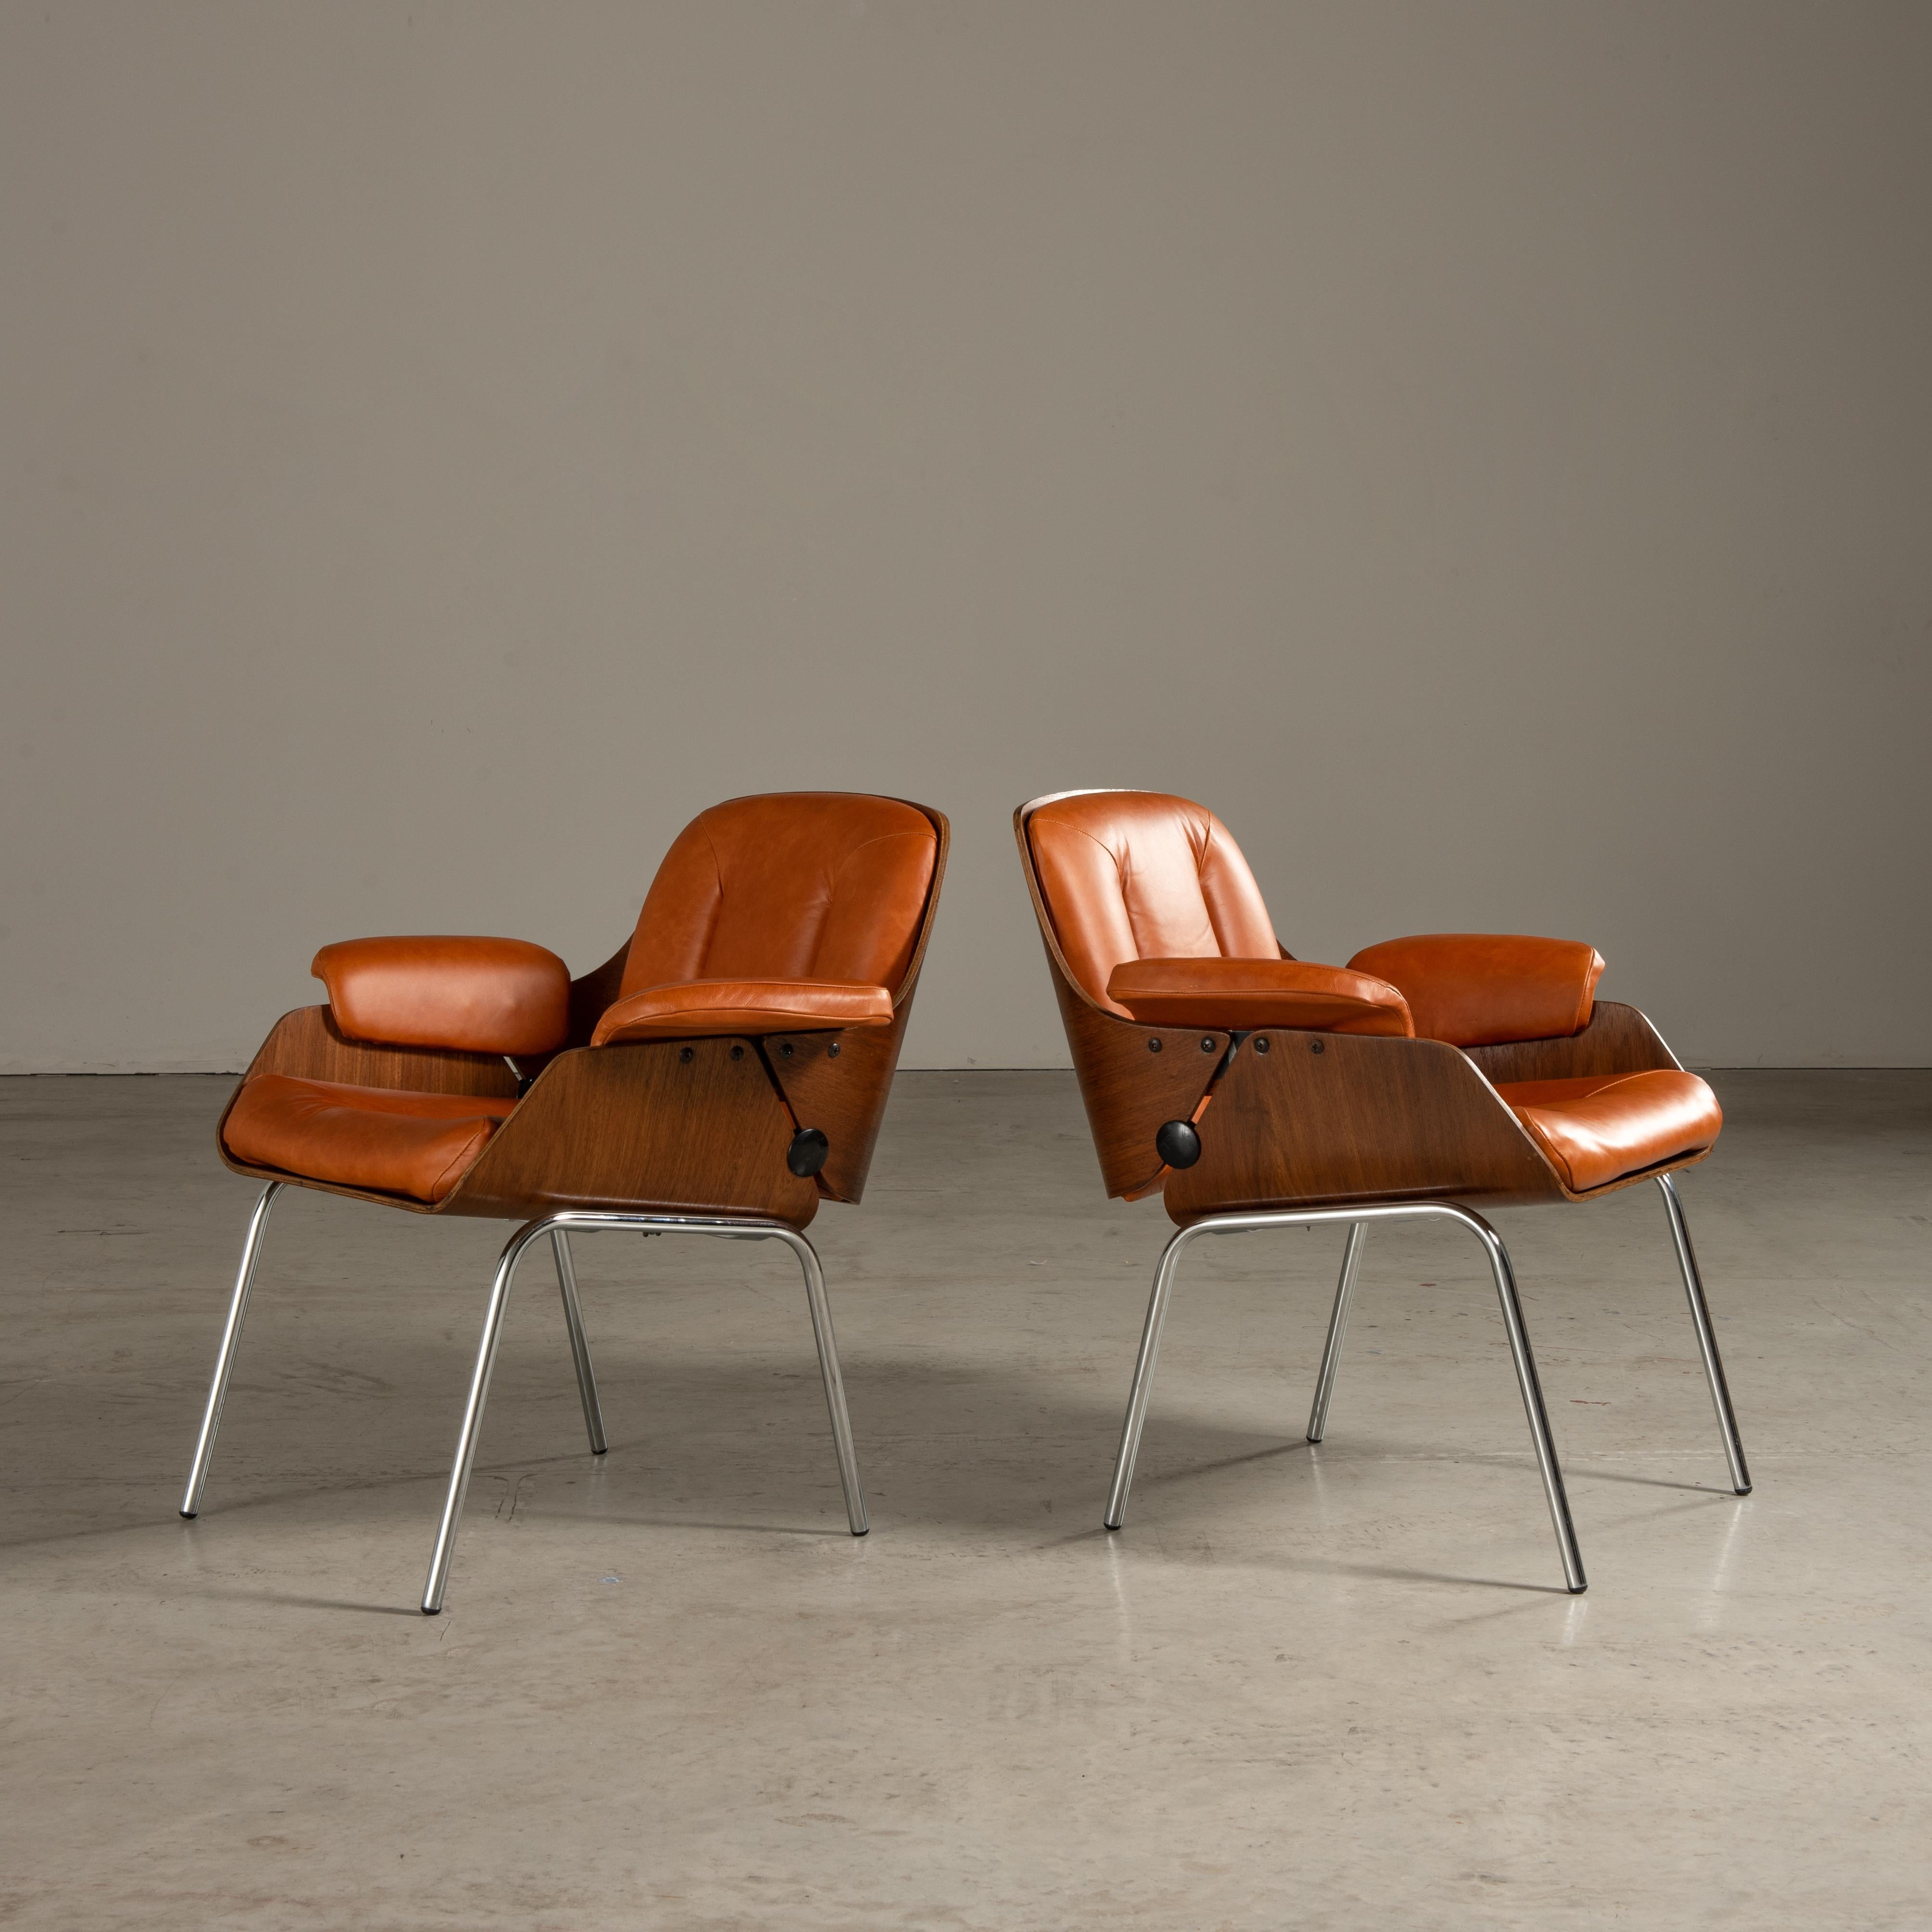 Armchair with Wood, Leather and Steel, by Carlo Fongaro, Brazilian Mid-Century For Sale 3